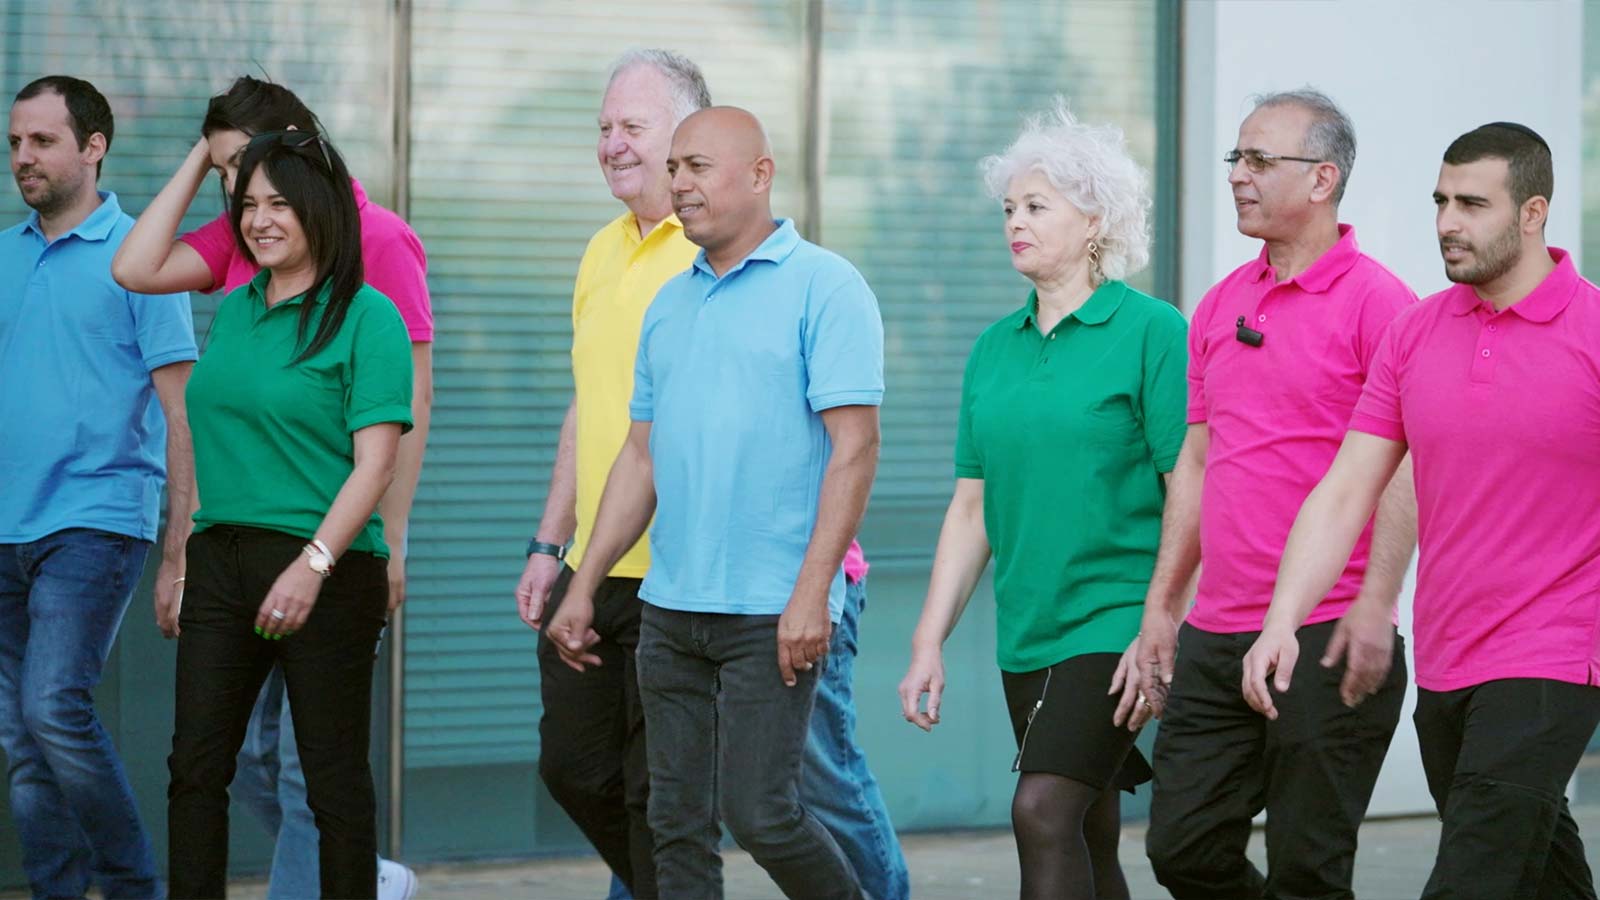 A group of Electra FM employees in colorful polo shirts